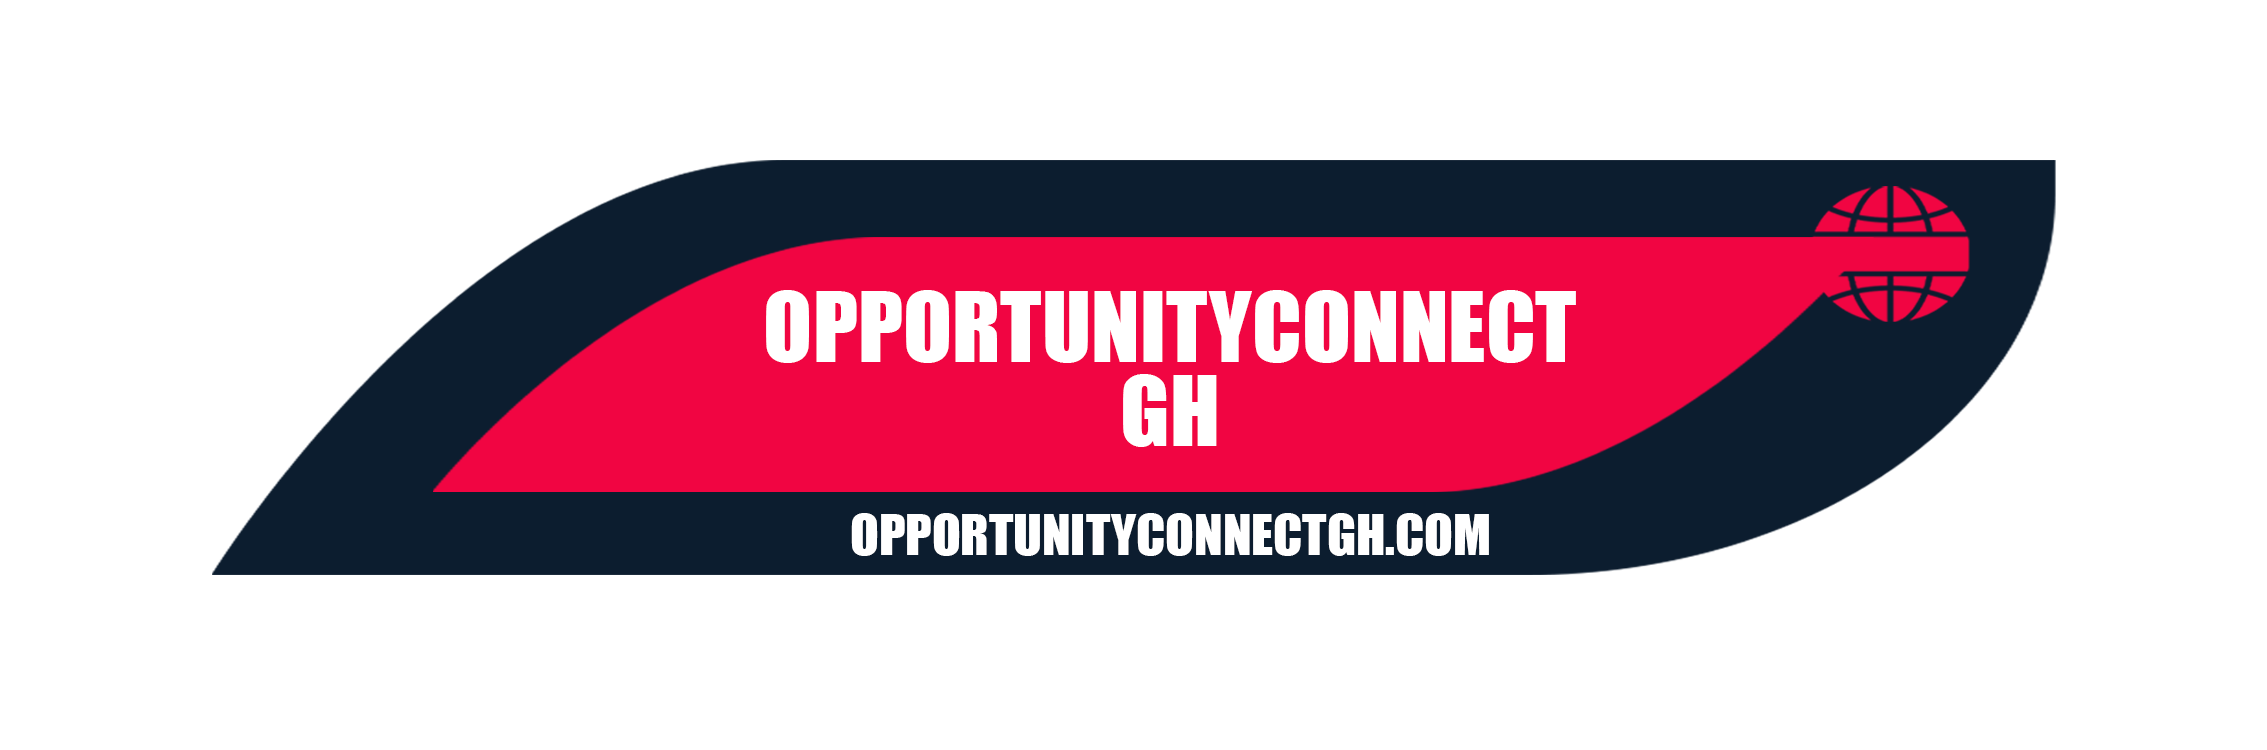 Opportunity Connect